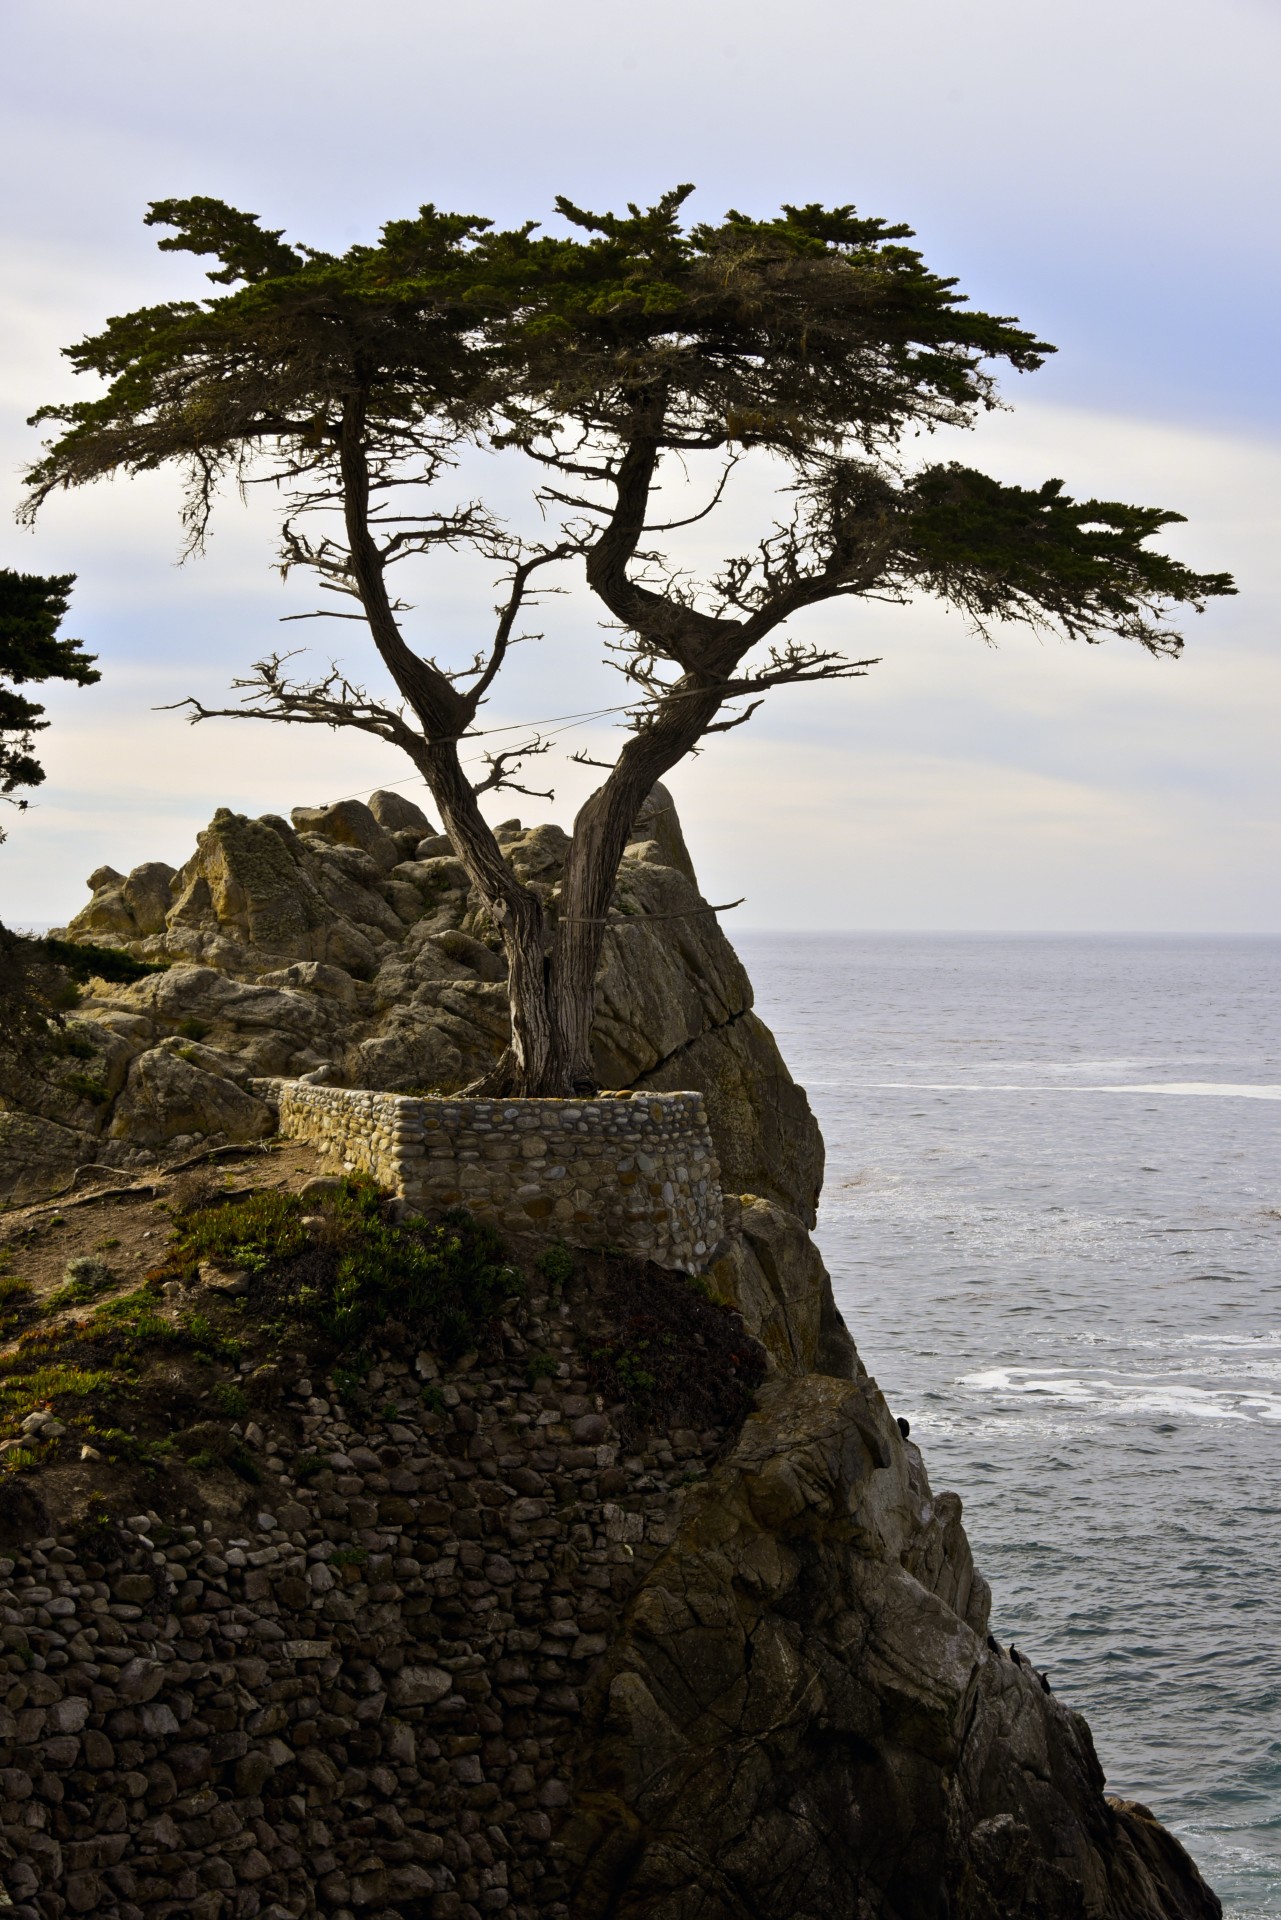 The Lone Cypress Tree in Vertical format